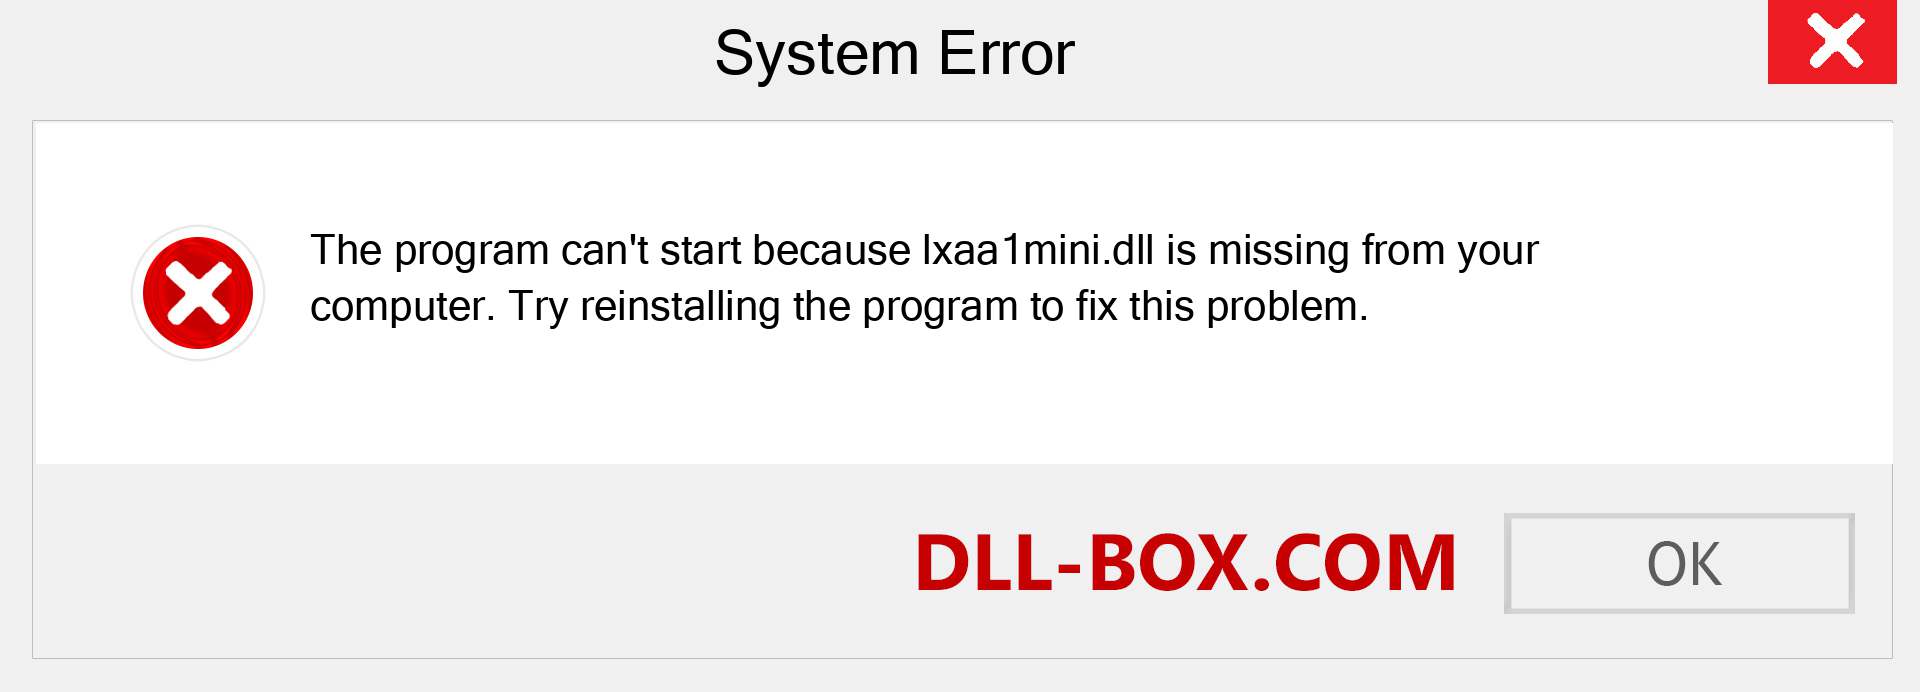  lxaa1mini.dll file is missing?. Download for Windows 7, 8, 10 - Fix  lxaa1mini dll Missing Error on Windows, photos, images